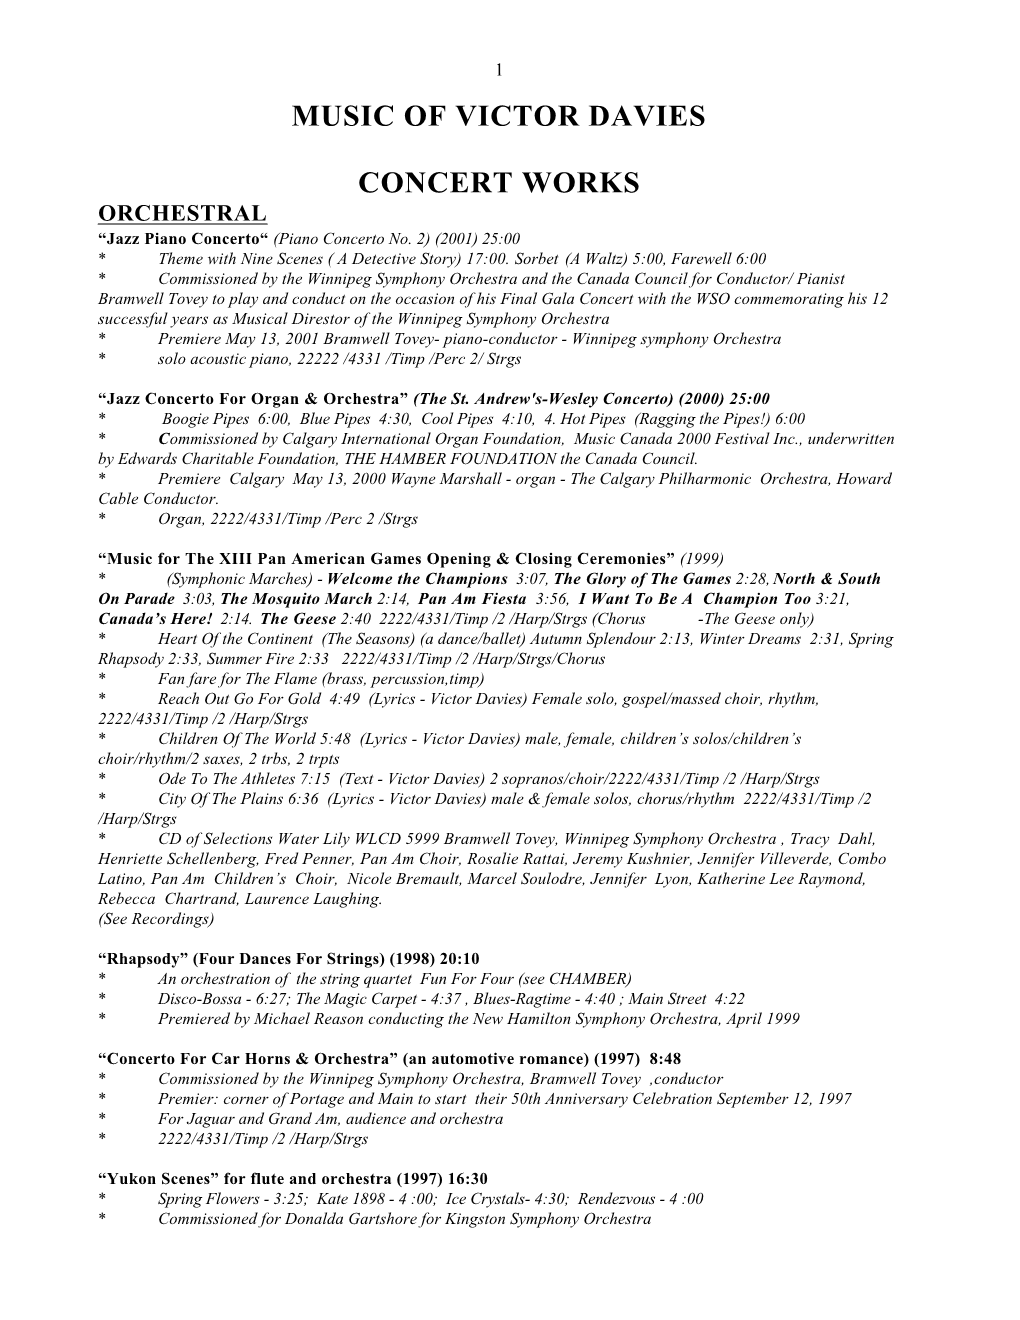 Music of Victor Davies Concert Works